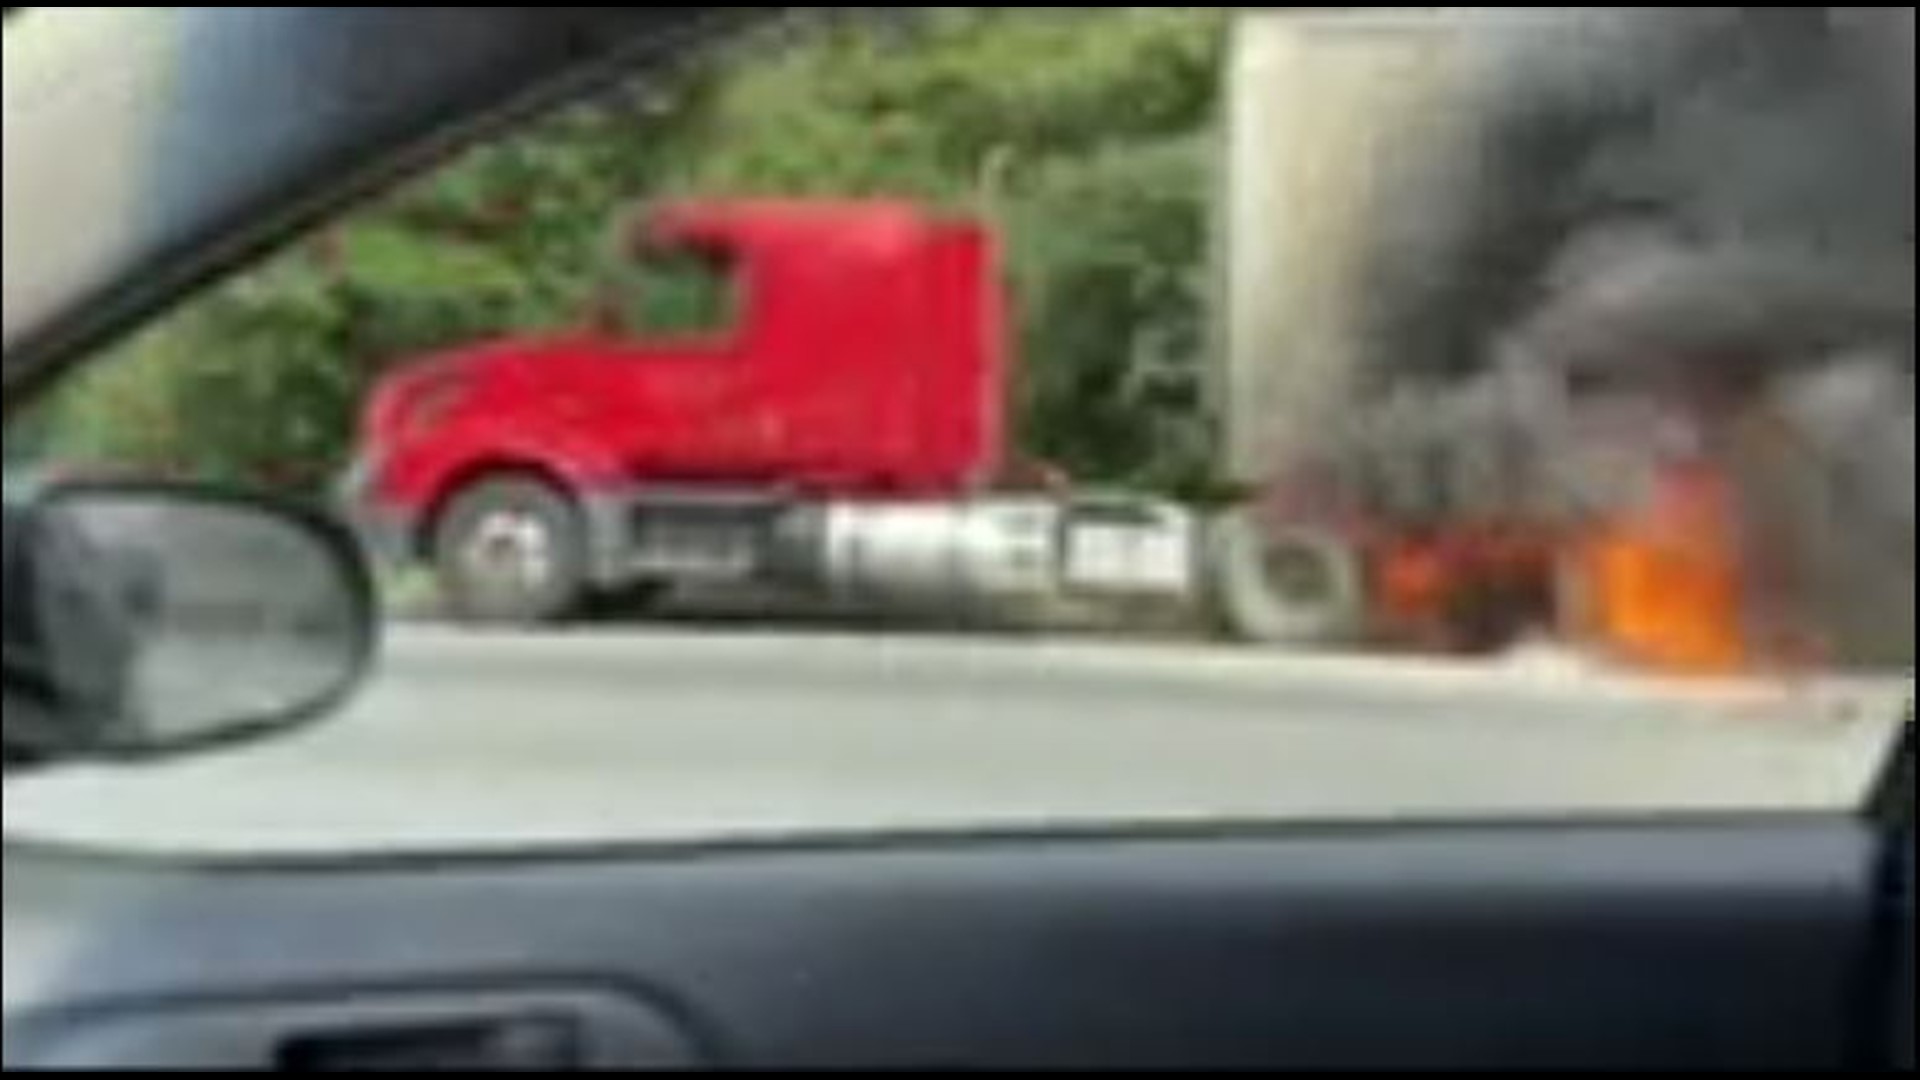 A viewer shared this video of a truck fire that happened Monday morning.